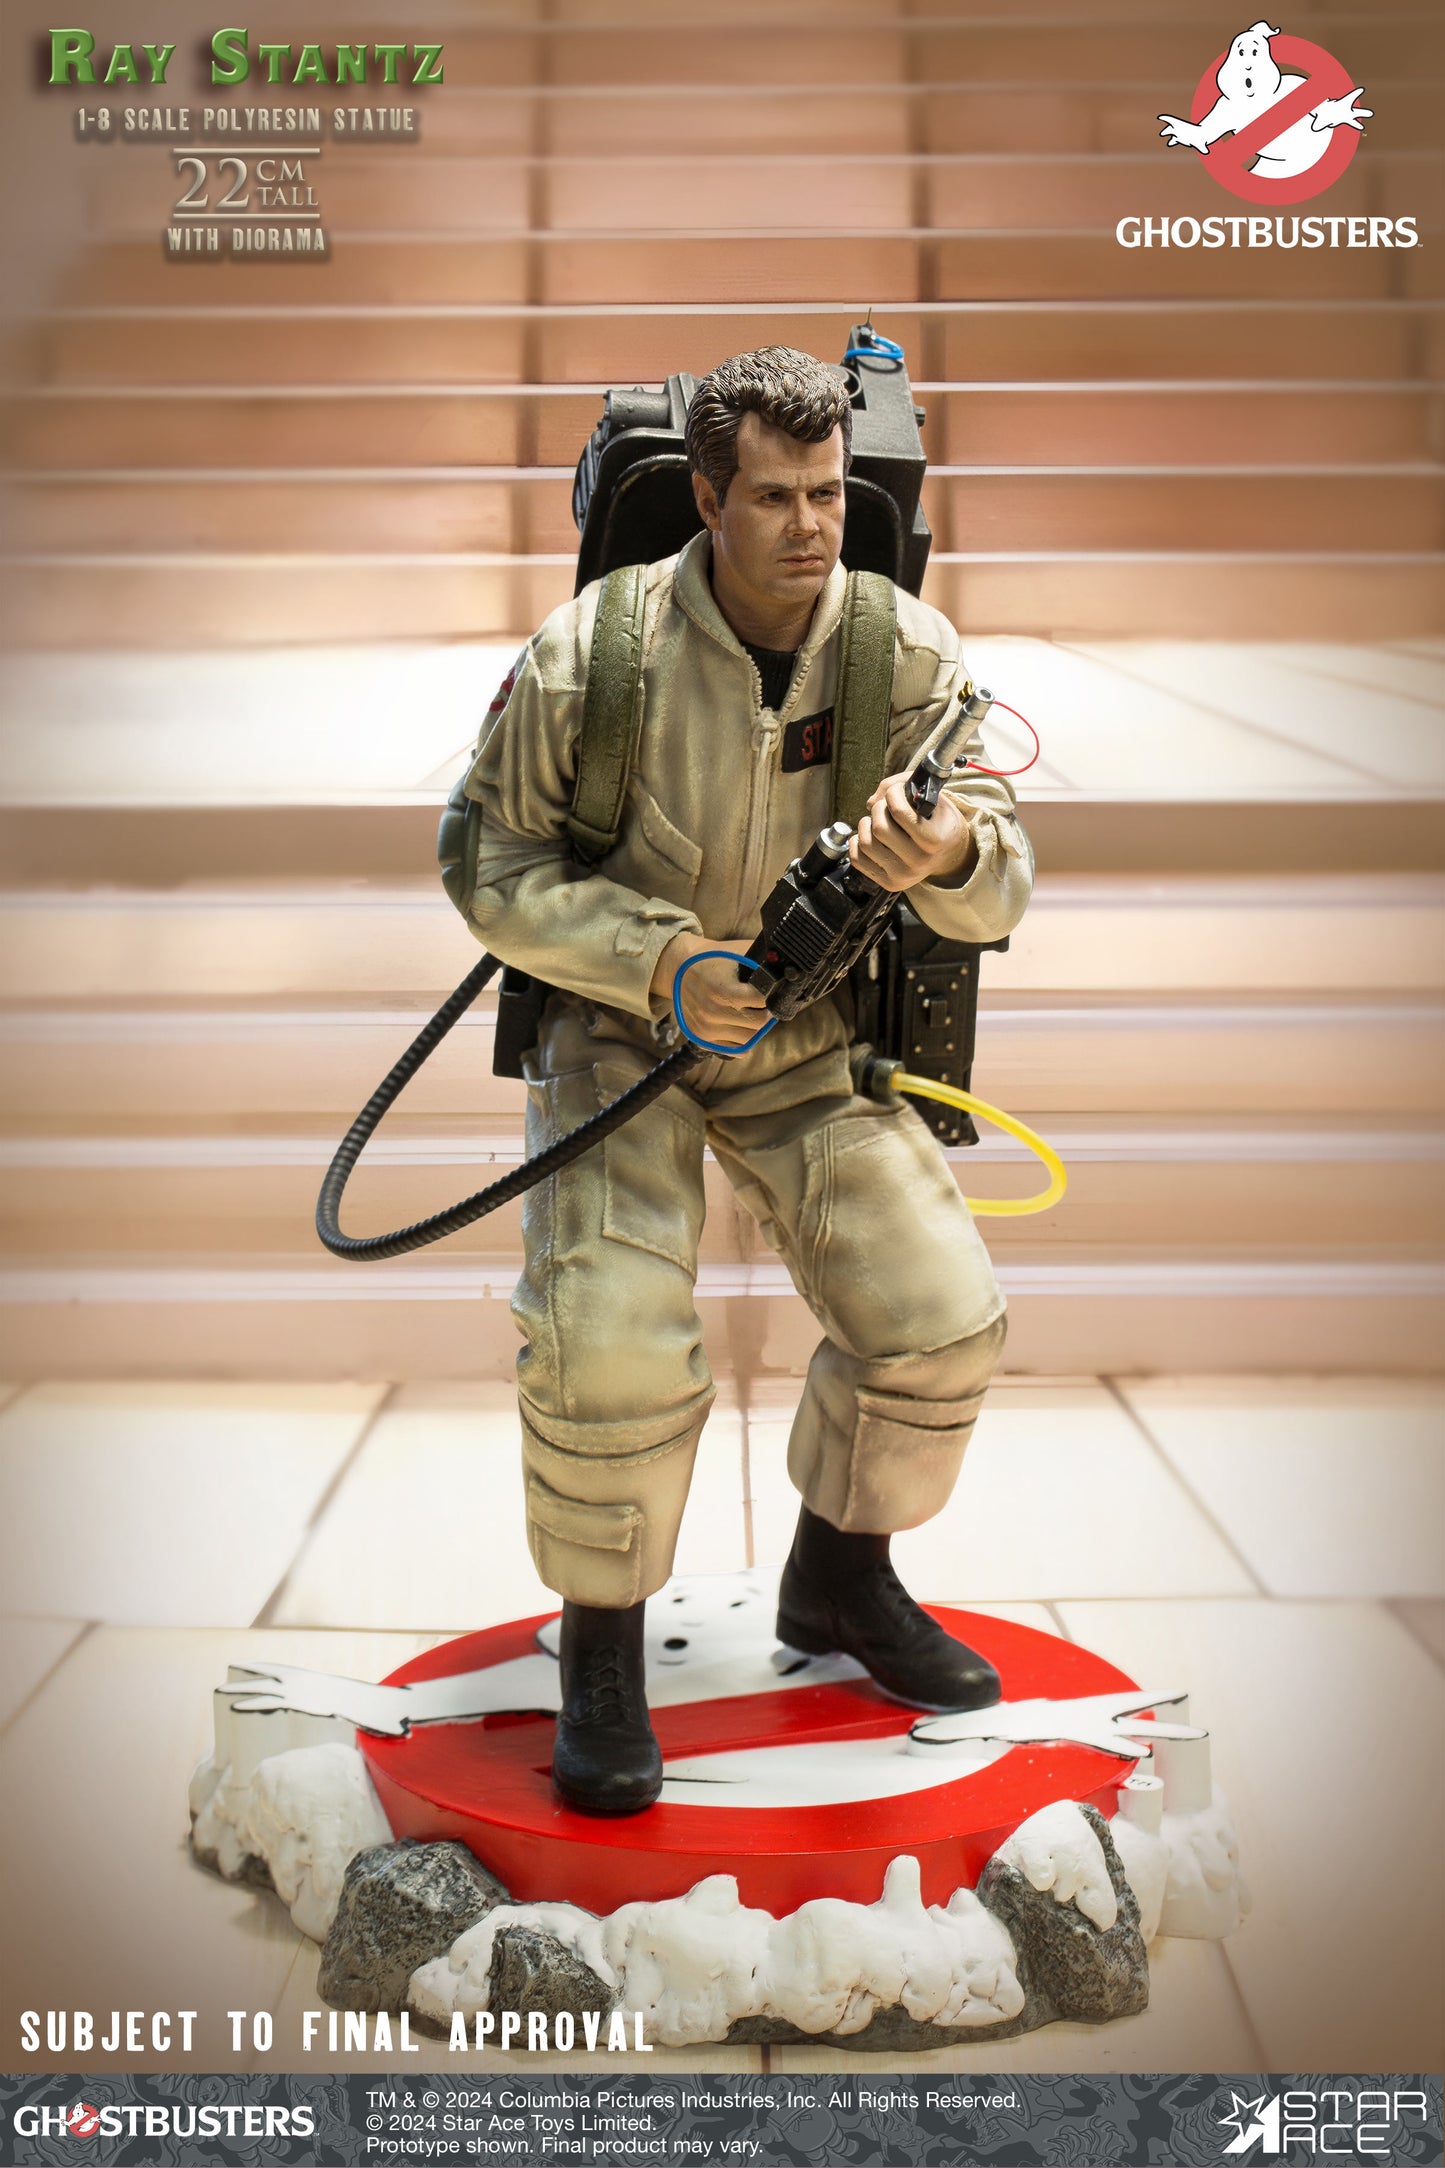 Ray Stantz Ghostbusters 1/8 Scale Statue Pre-order